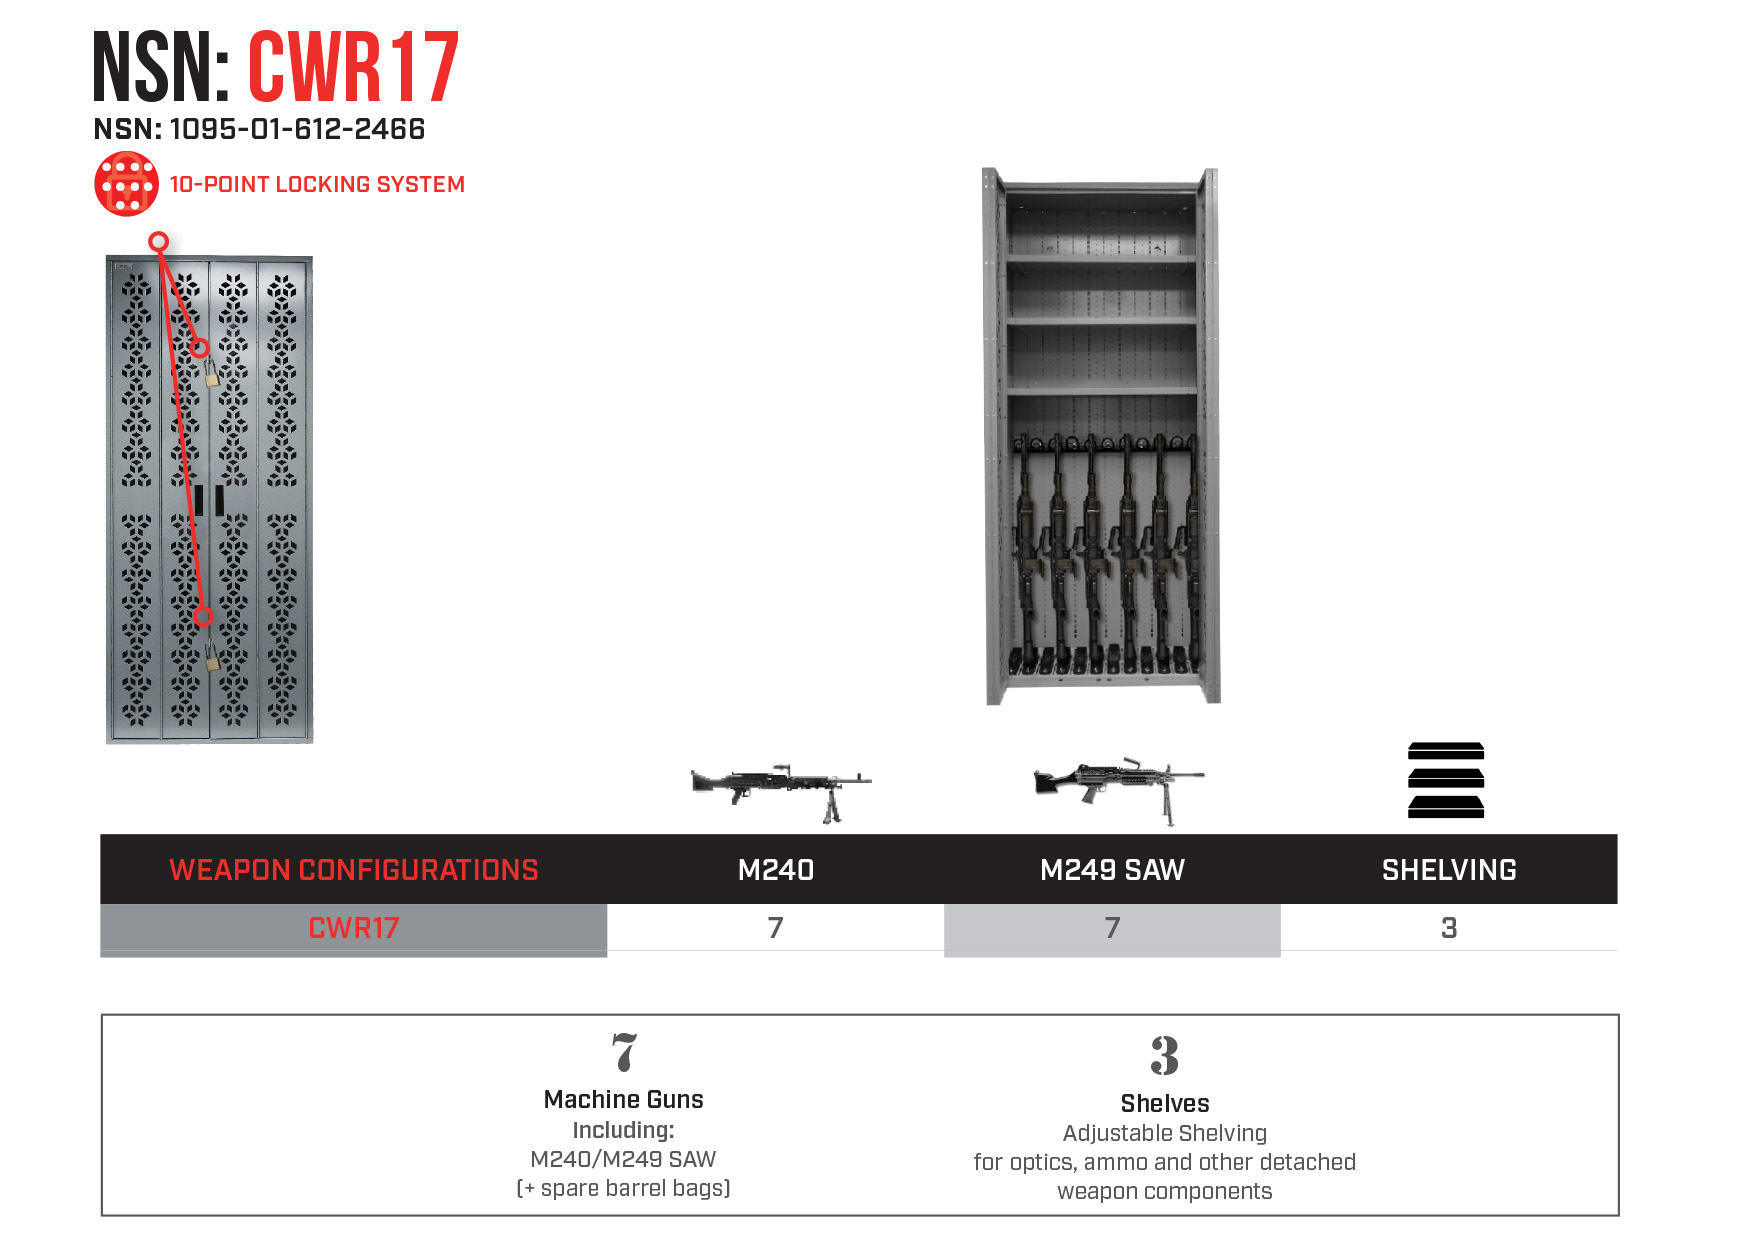 Combat NSN Weapon Rack - CWR17 - NSN - 1095-01-612-2466 - Armory Weapon Storage